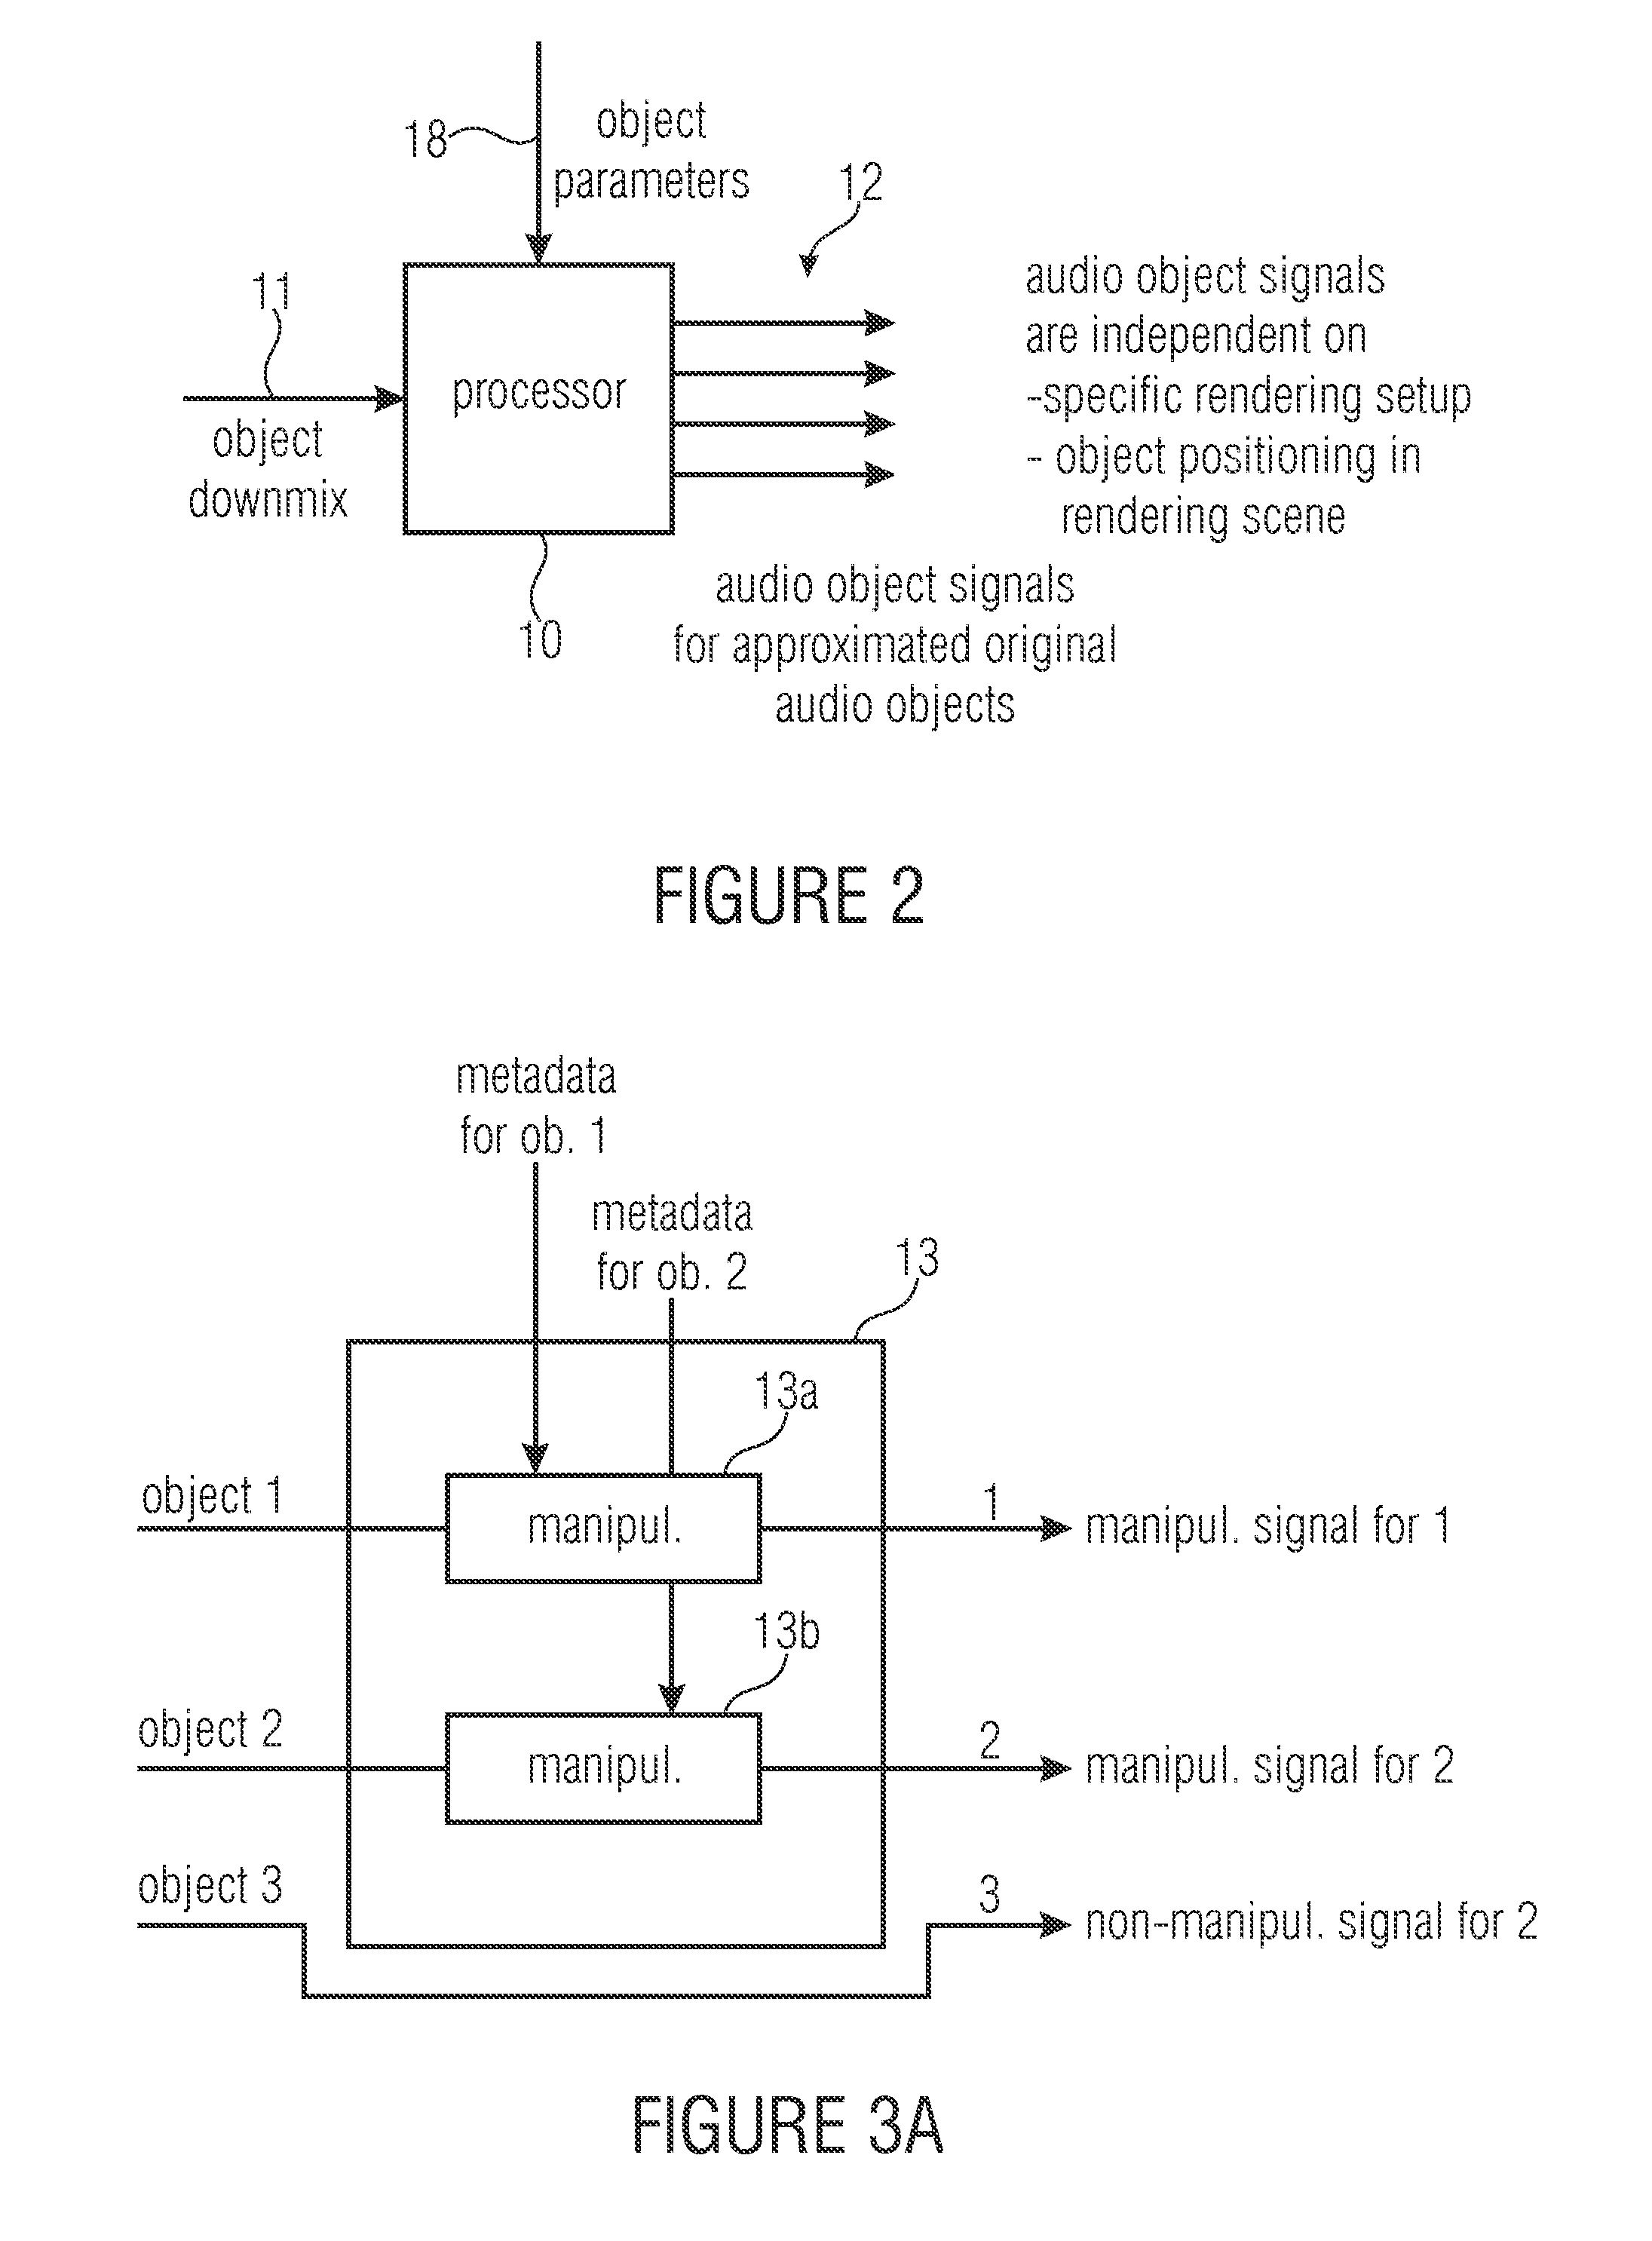 Apparatus and method for generating audio output signals using object based metadata